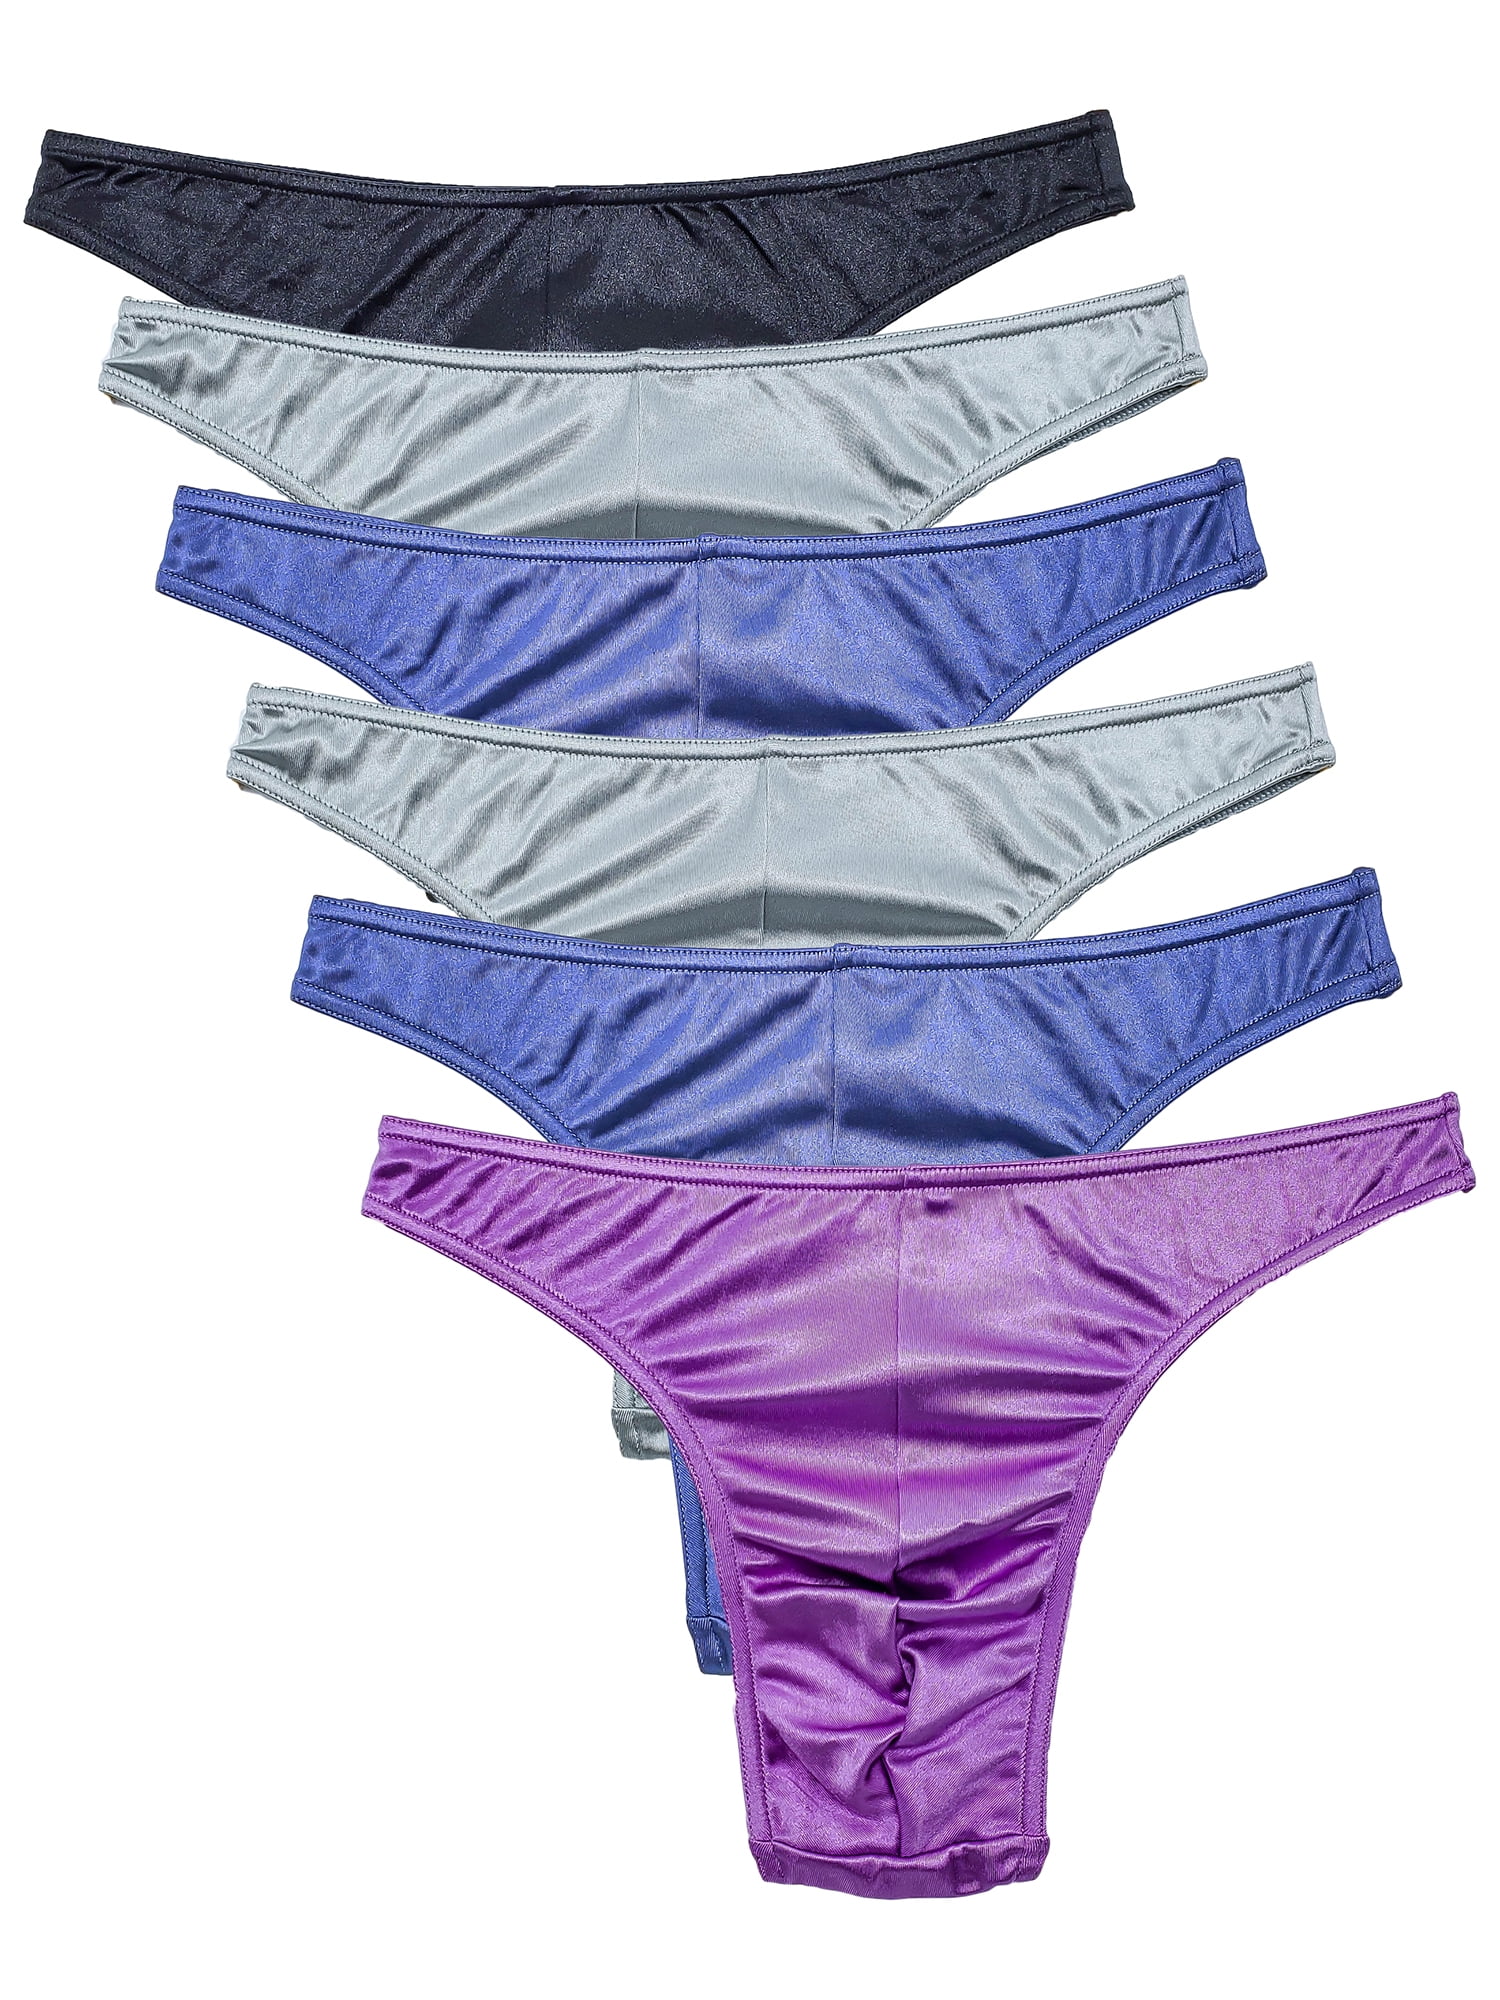 Barbra Lingerie Barbra Men S Underwear Satin Silky Sexy Thong Small To Plus Sizes 6 Pack